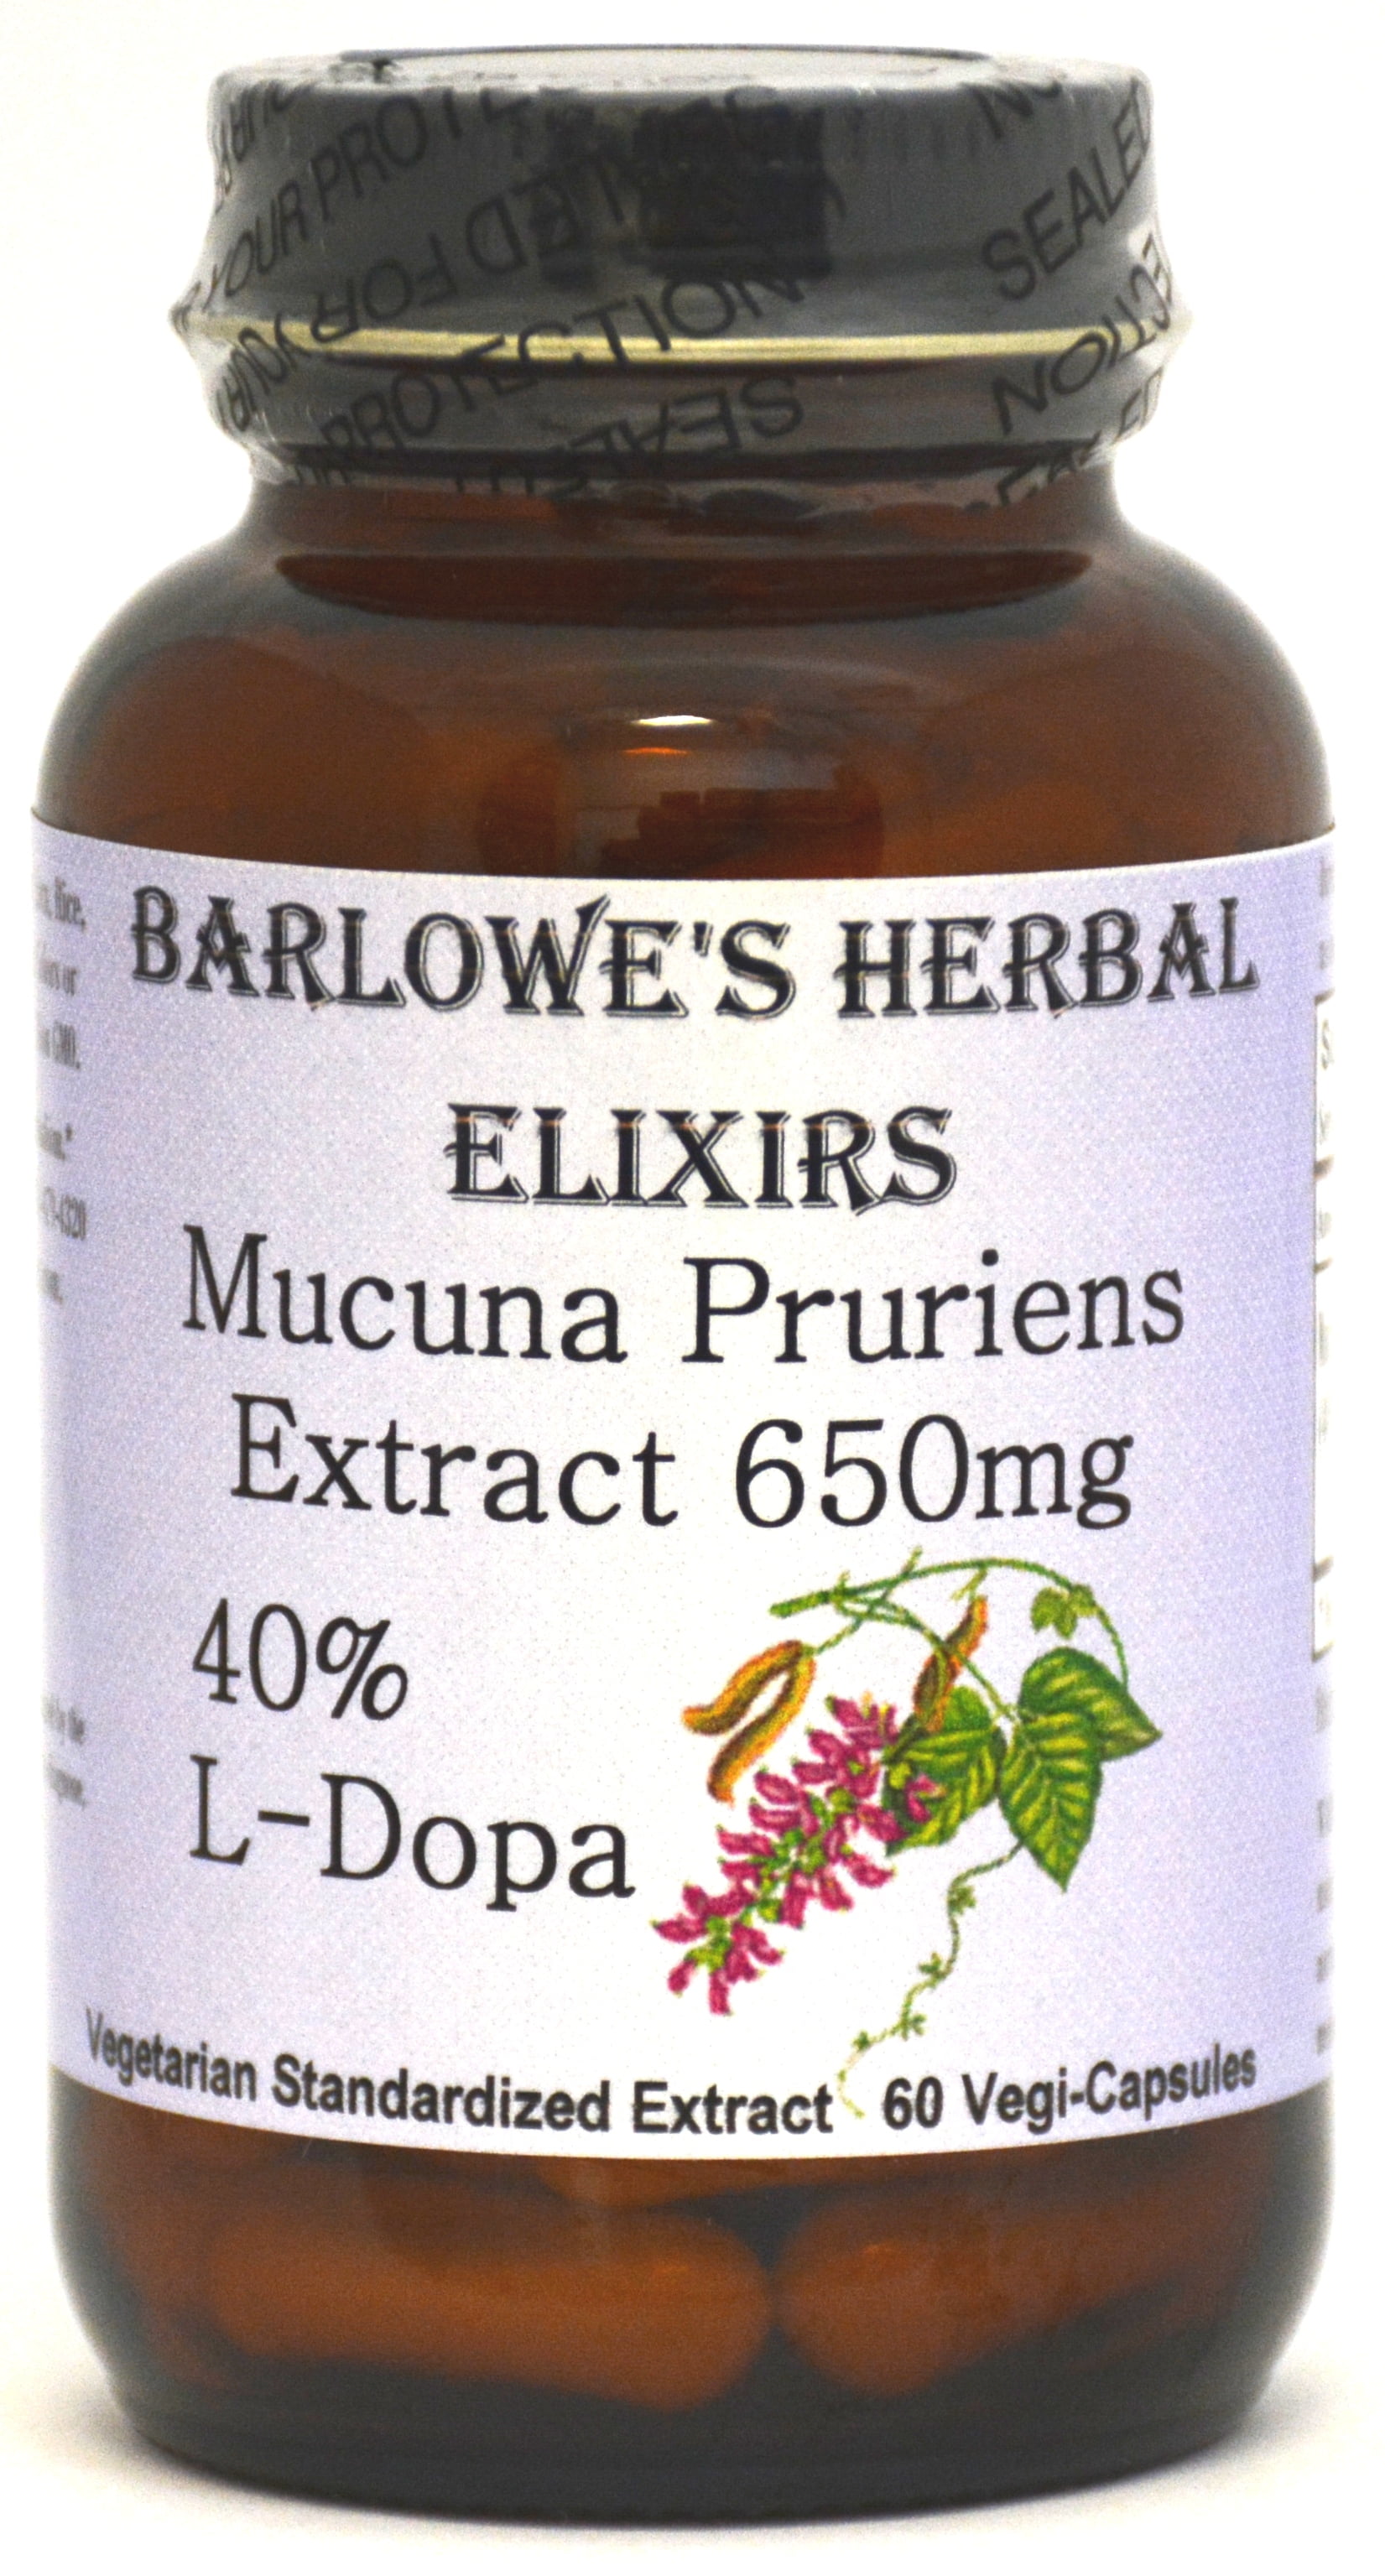 Mucuna Pruriens Seeds 120 Capsules 2 Bottles L-DOPA 99% Extract Powder 